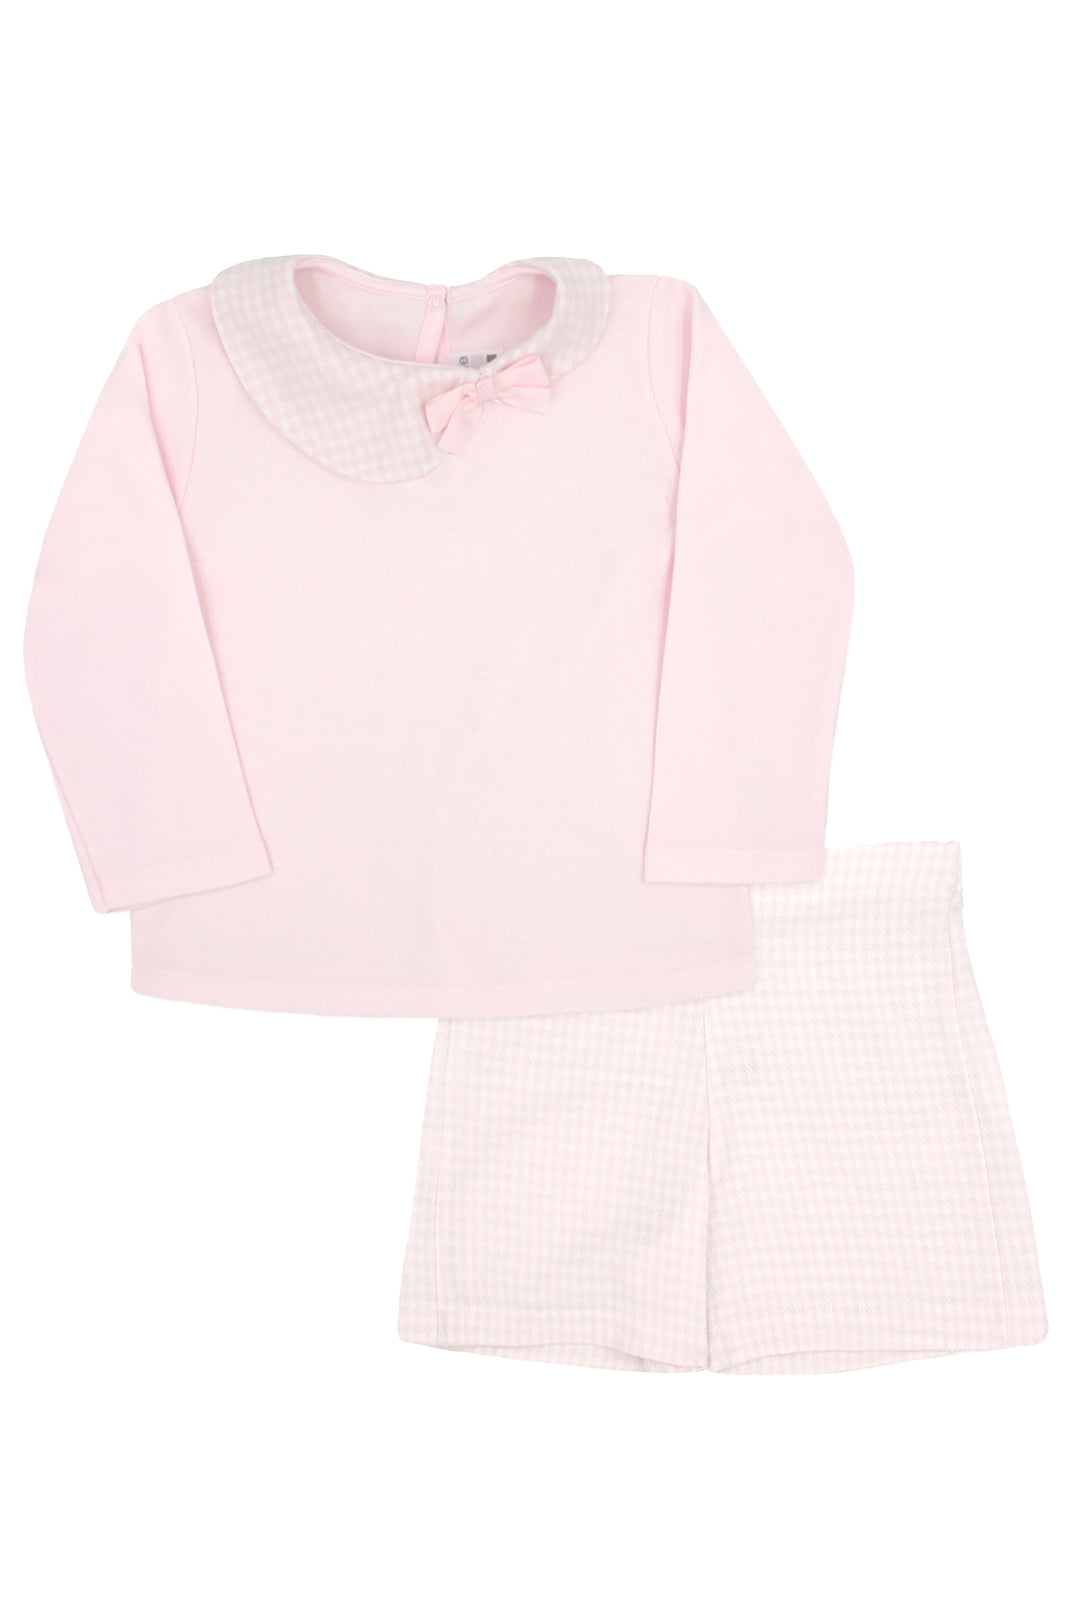 Rapife "Alison" Pink Houndstooth Top & Shorts | Millie and John